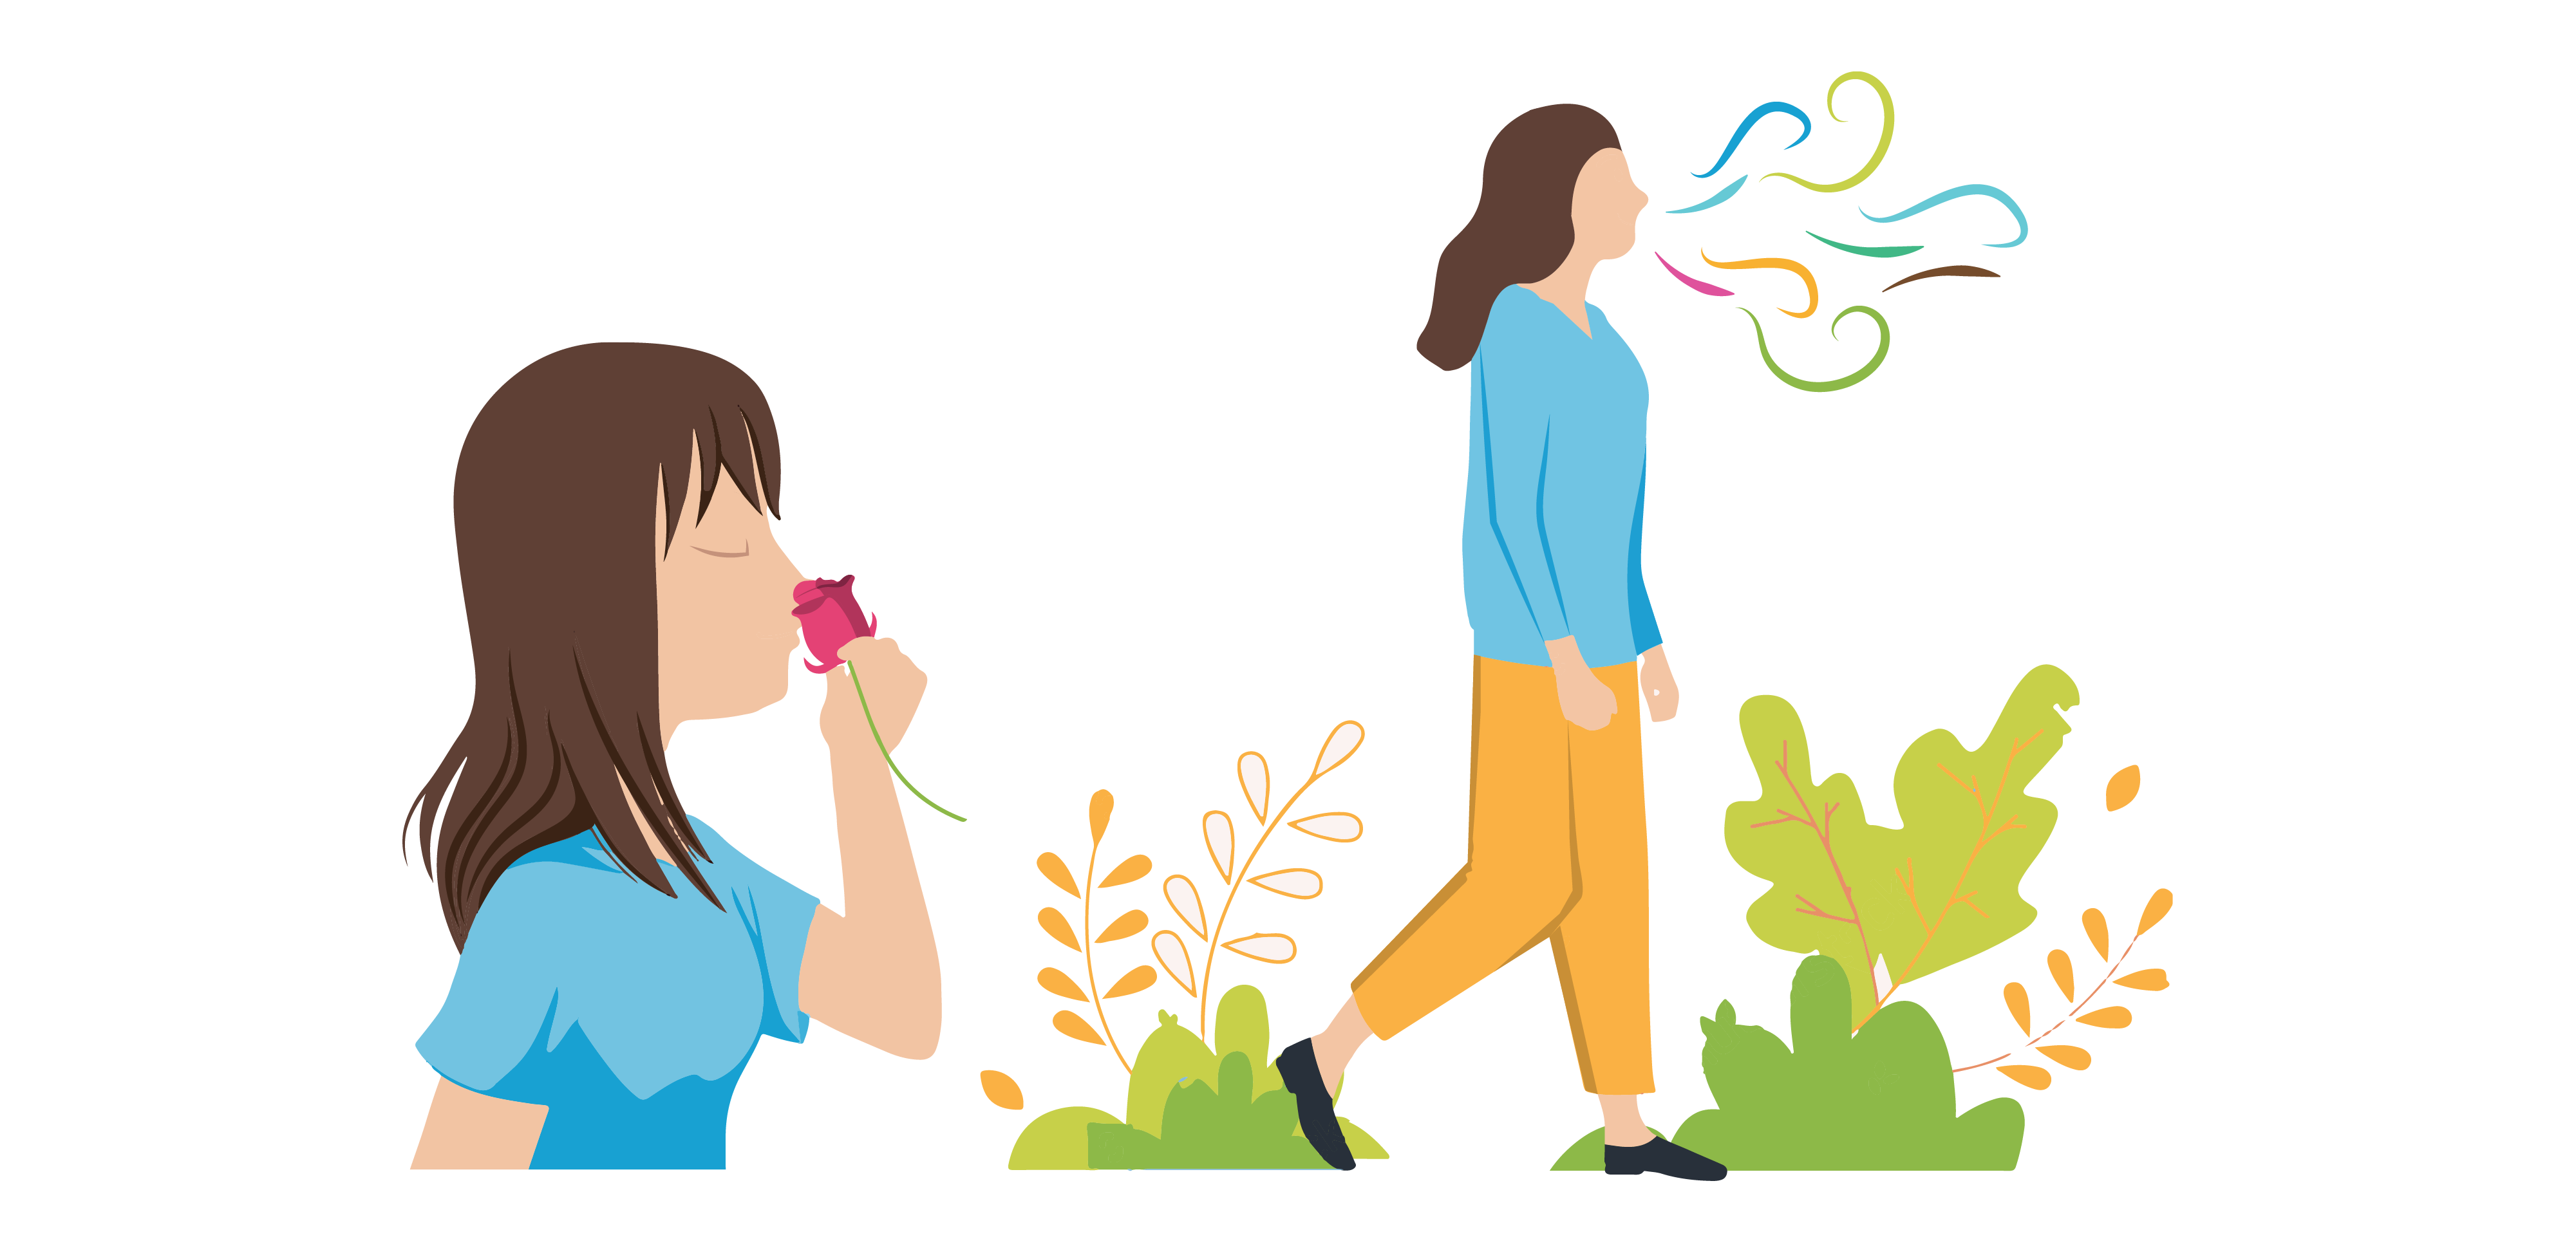 Left: Person with long, brown hair and is wearing a blue shirt, is holding and smelling a pink rose. Right: Person with long, brown hair and is wearing a blue shirt, yellow pants and black shoes is walking. Behind her are green bushes and orange plants. Coming out of her face are blue, green, orange and purple wavy lines.